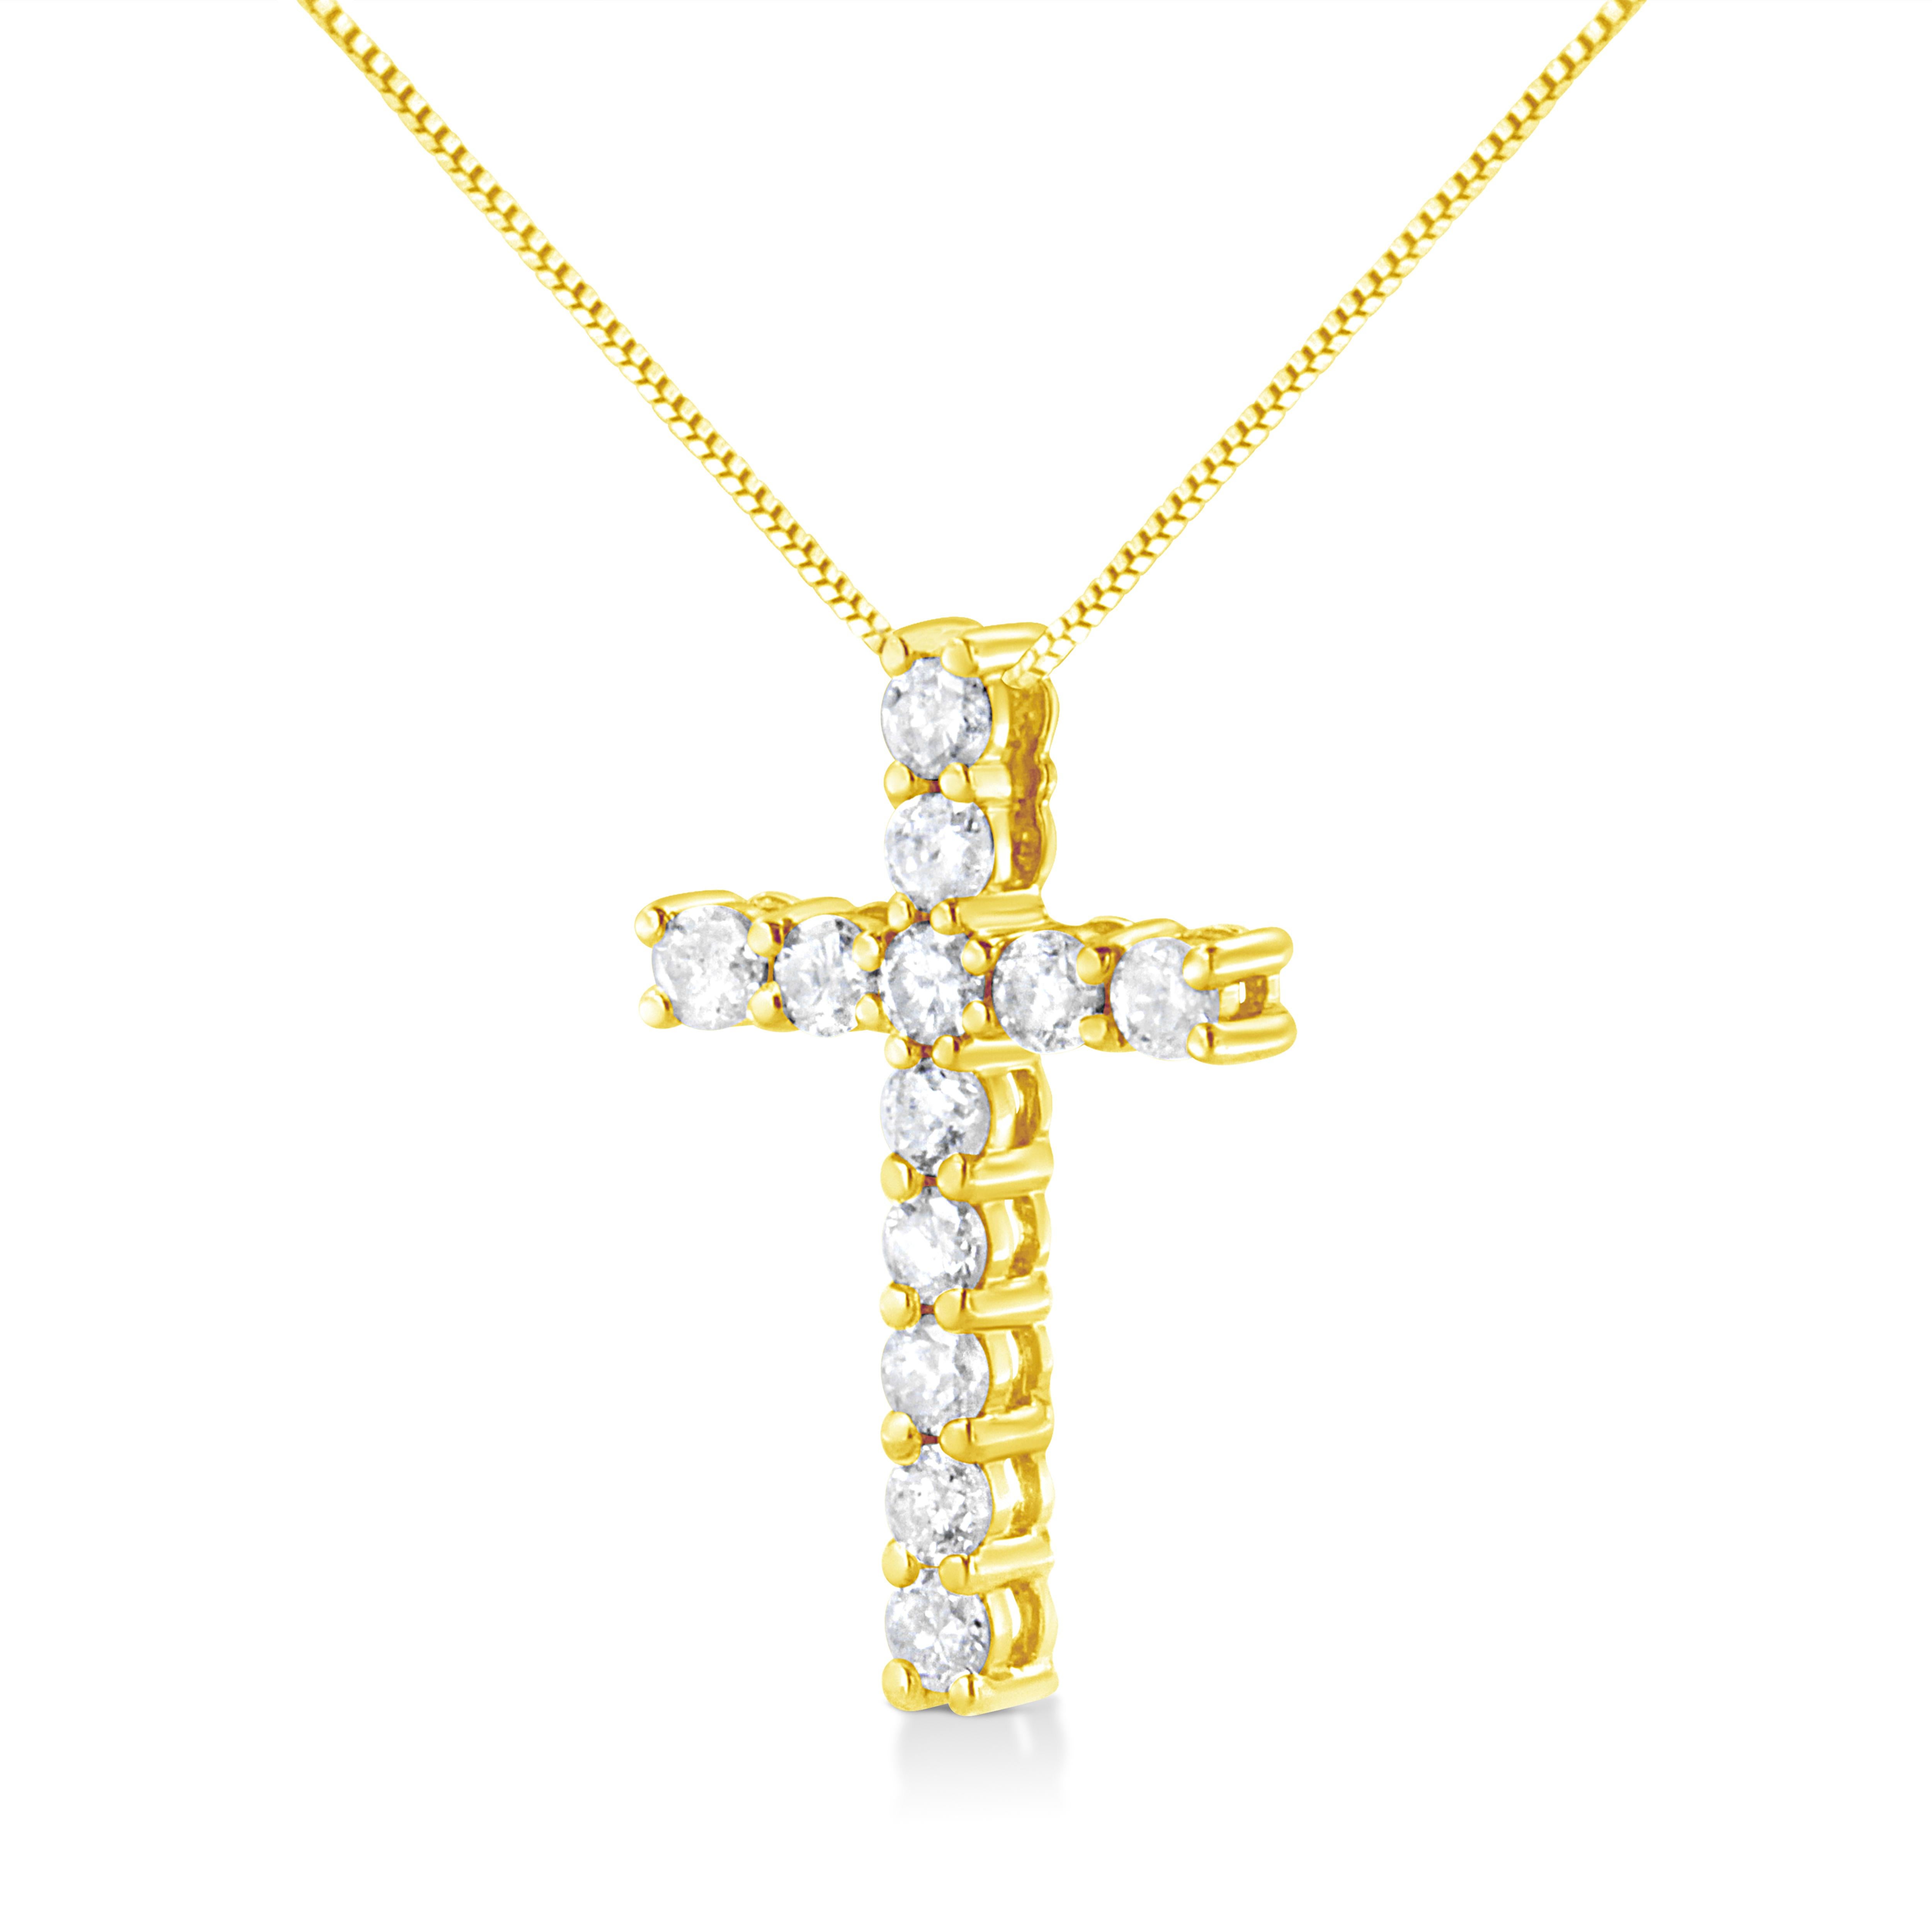 Round Cut Yellow Gold Plated Sterling Silver 1.0 Carat Diamond Cross Pendant Necklace